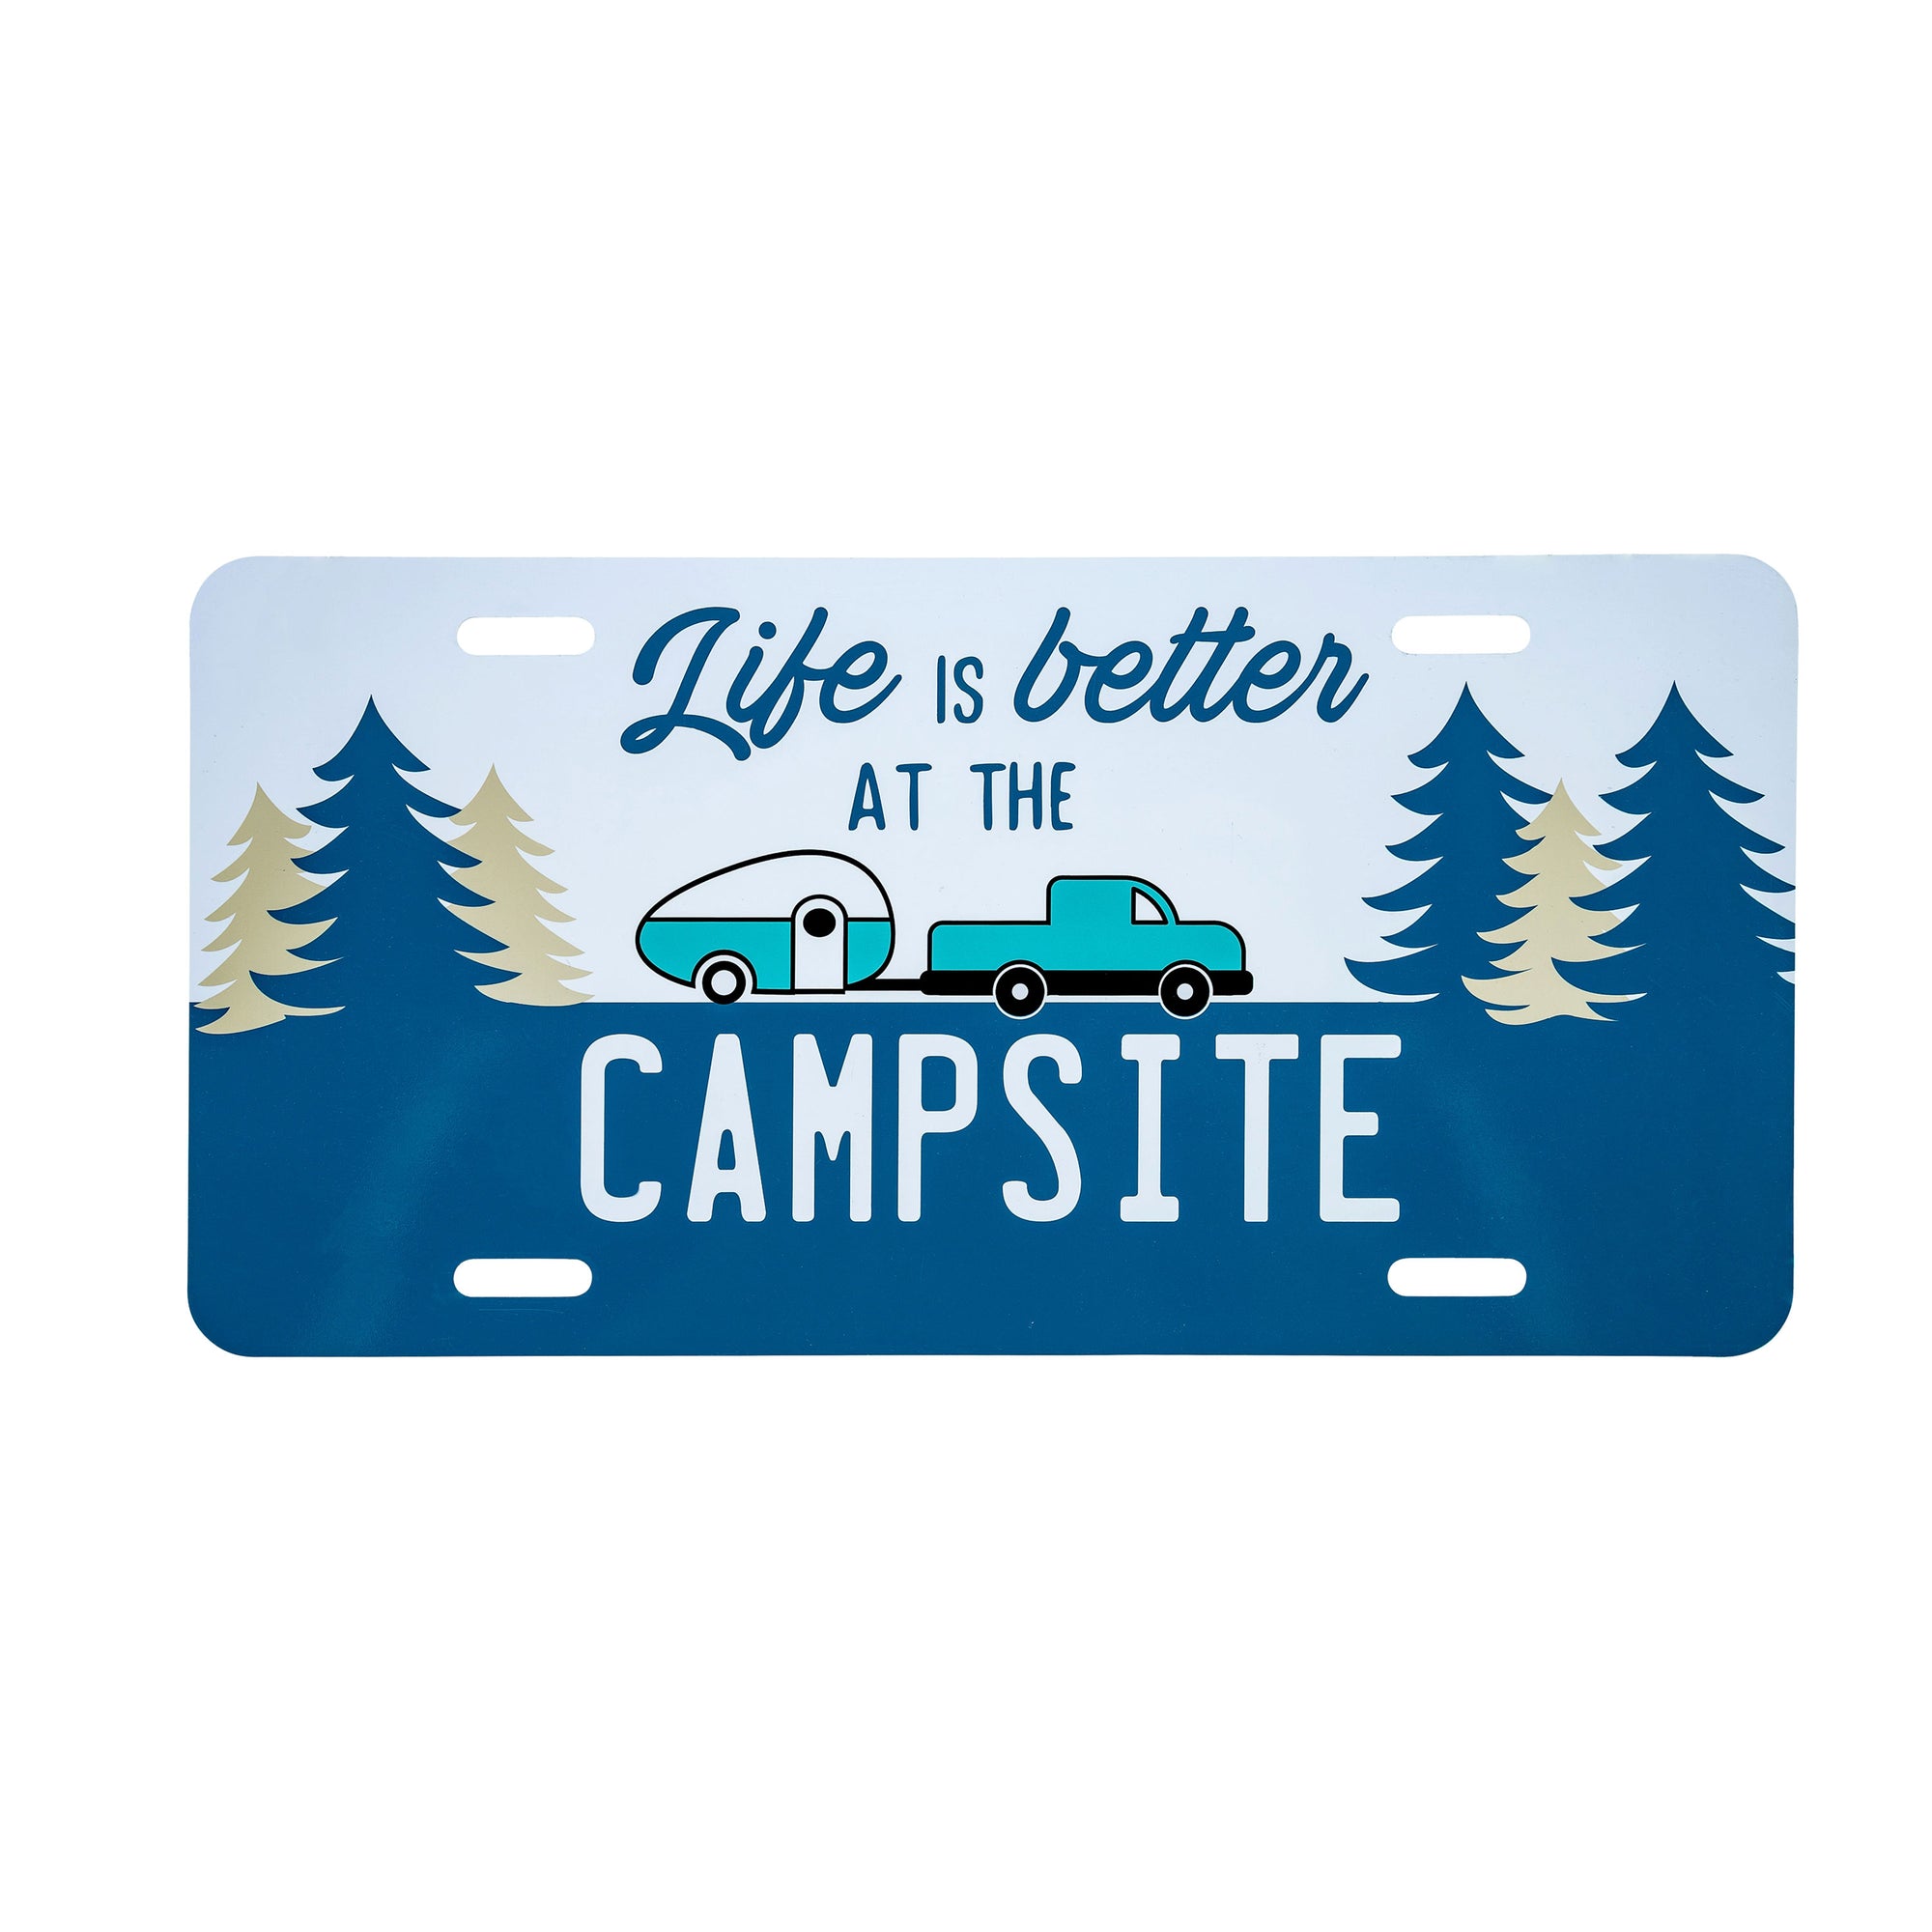 Camco 53250 "Life is Better at the Campsite" License Plate - Navy